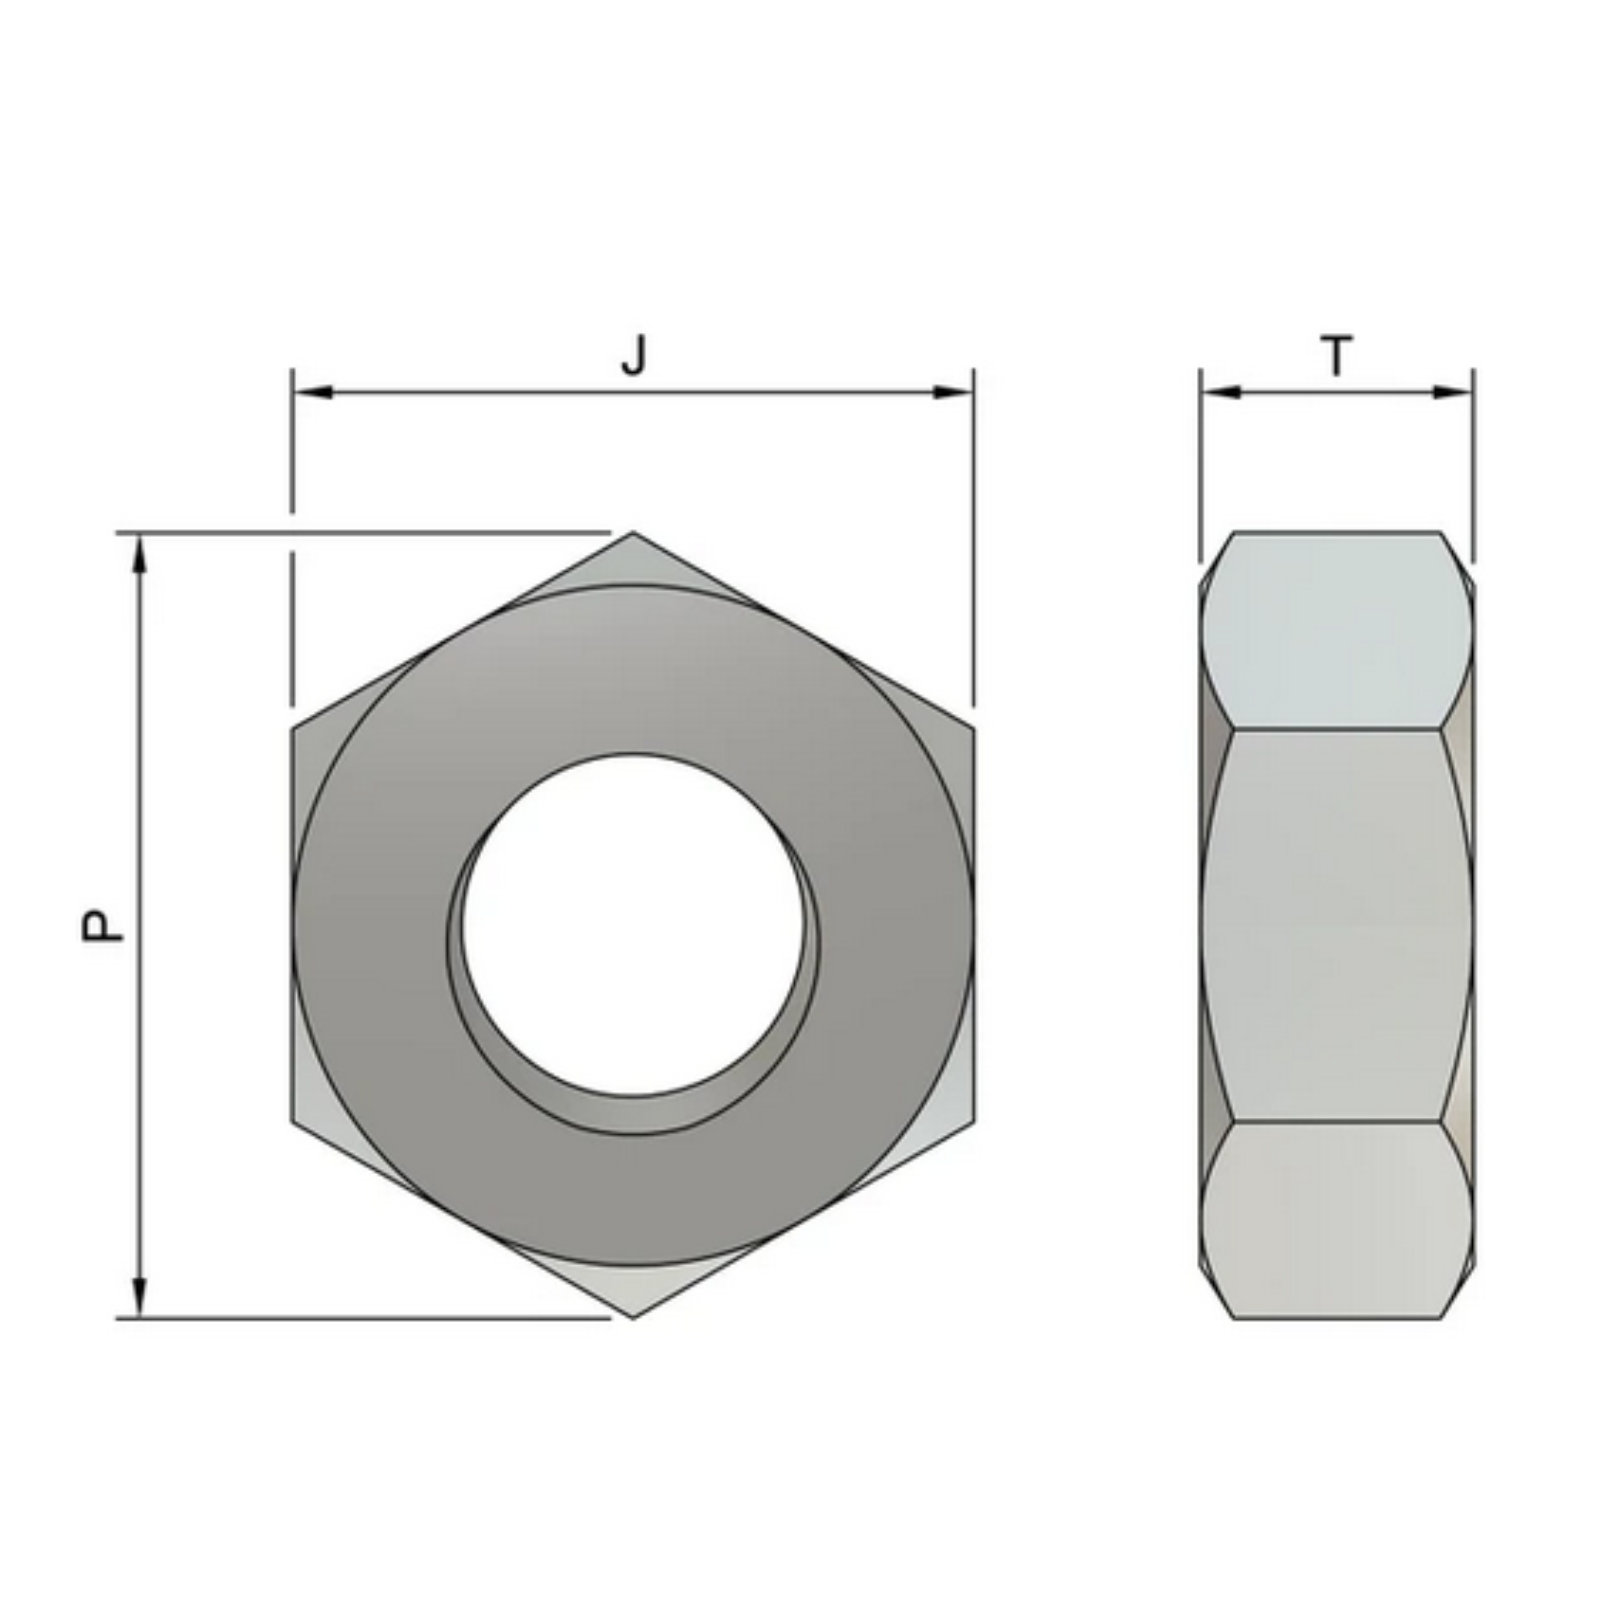 M3 Hexagon Nuts (DIN 934) - Stainless Steel (A2)